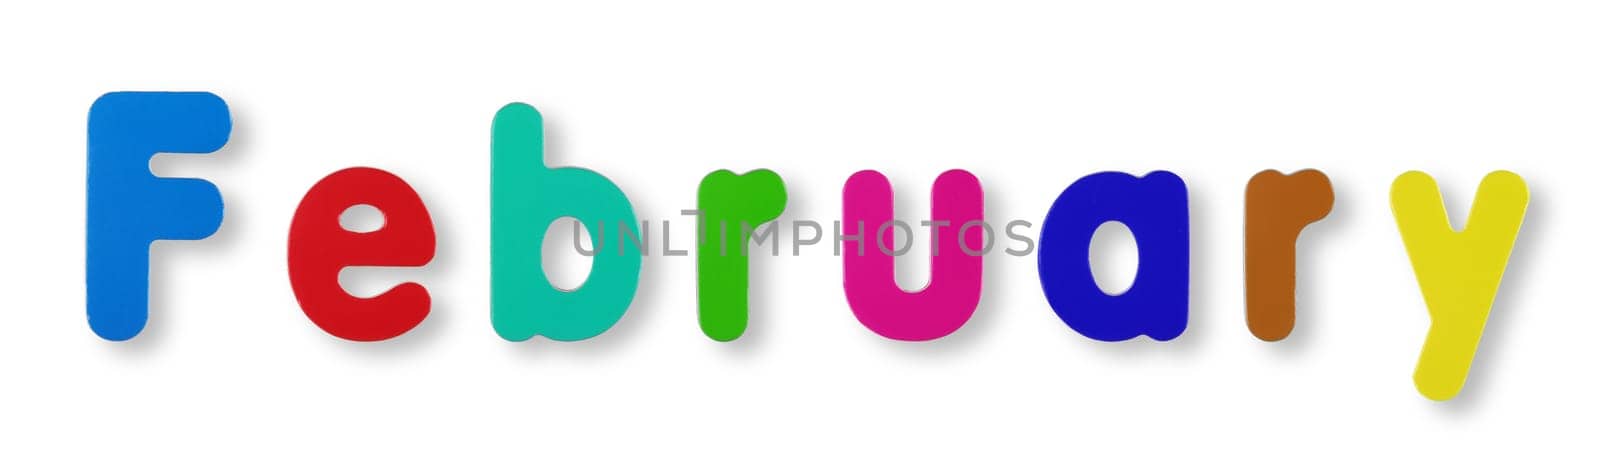 A February word in coloured magnetic letters on white with clipping path to remove shadow